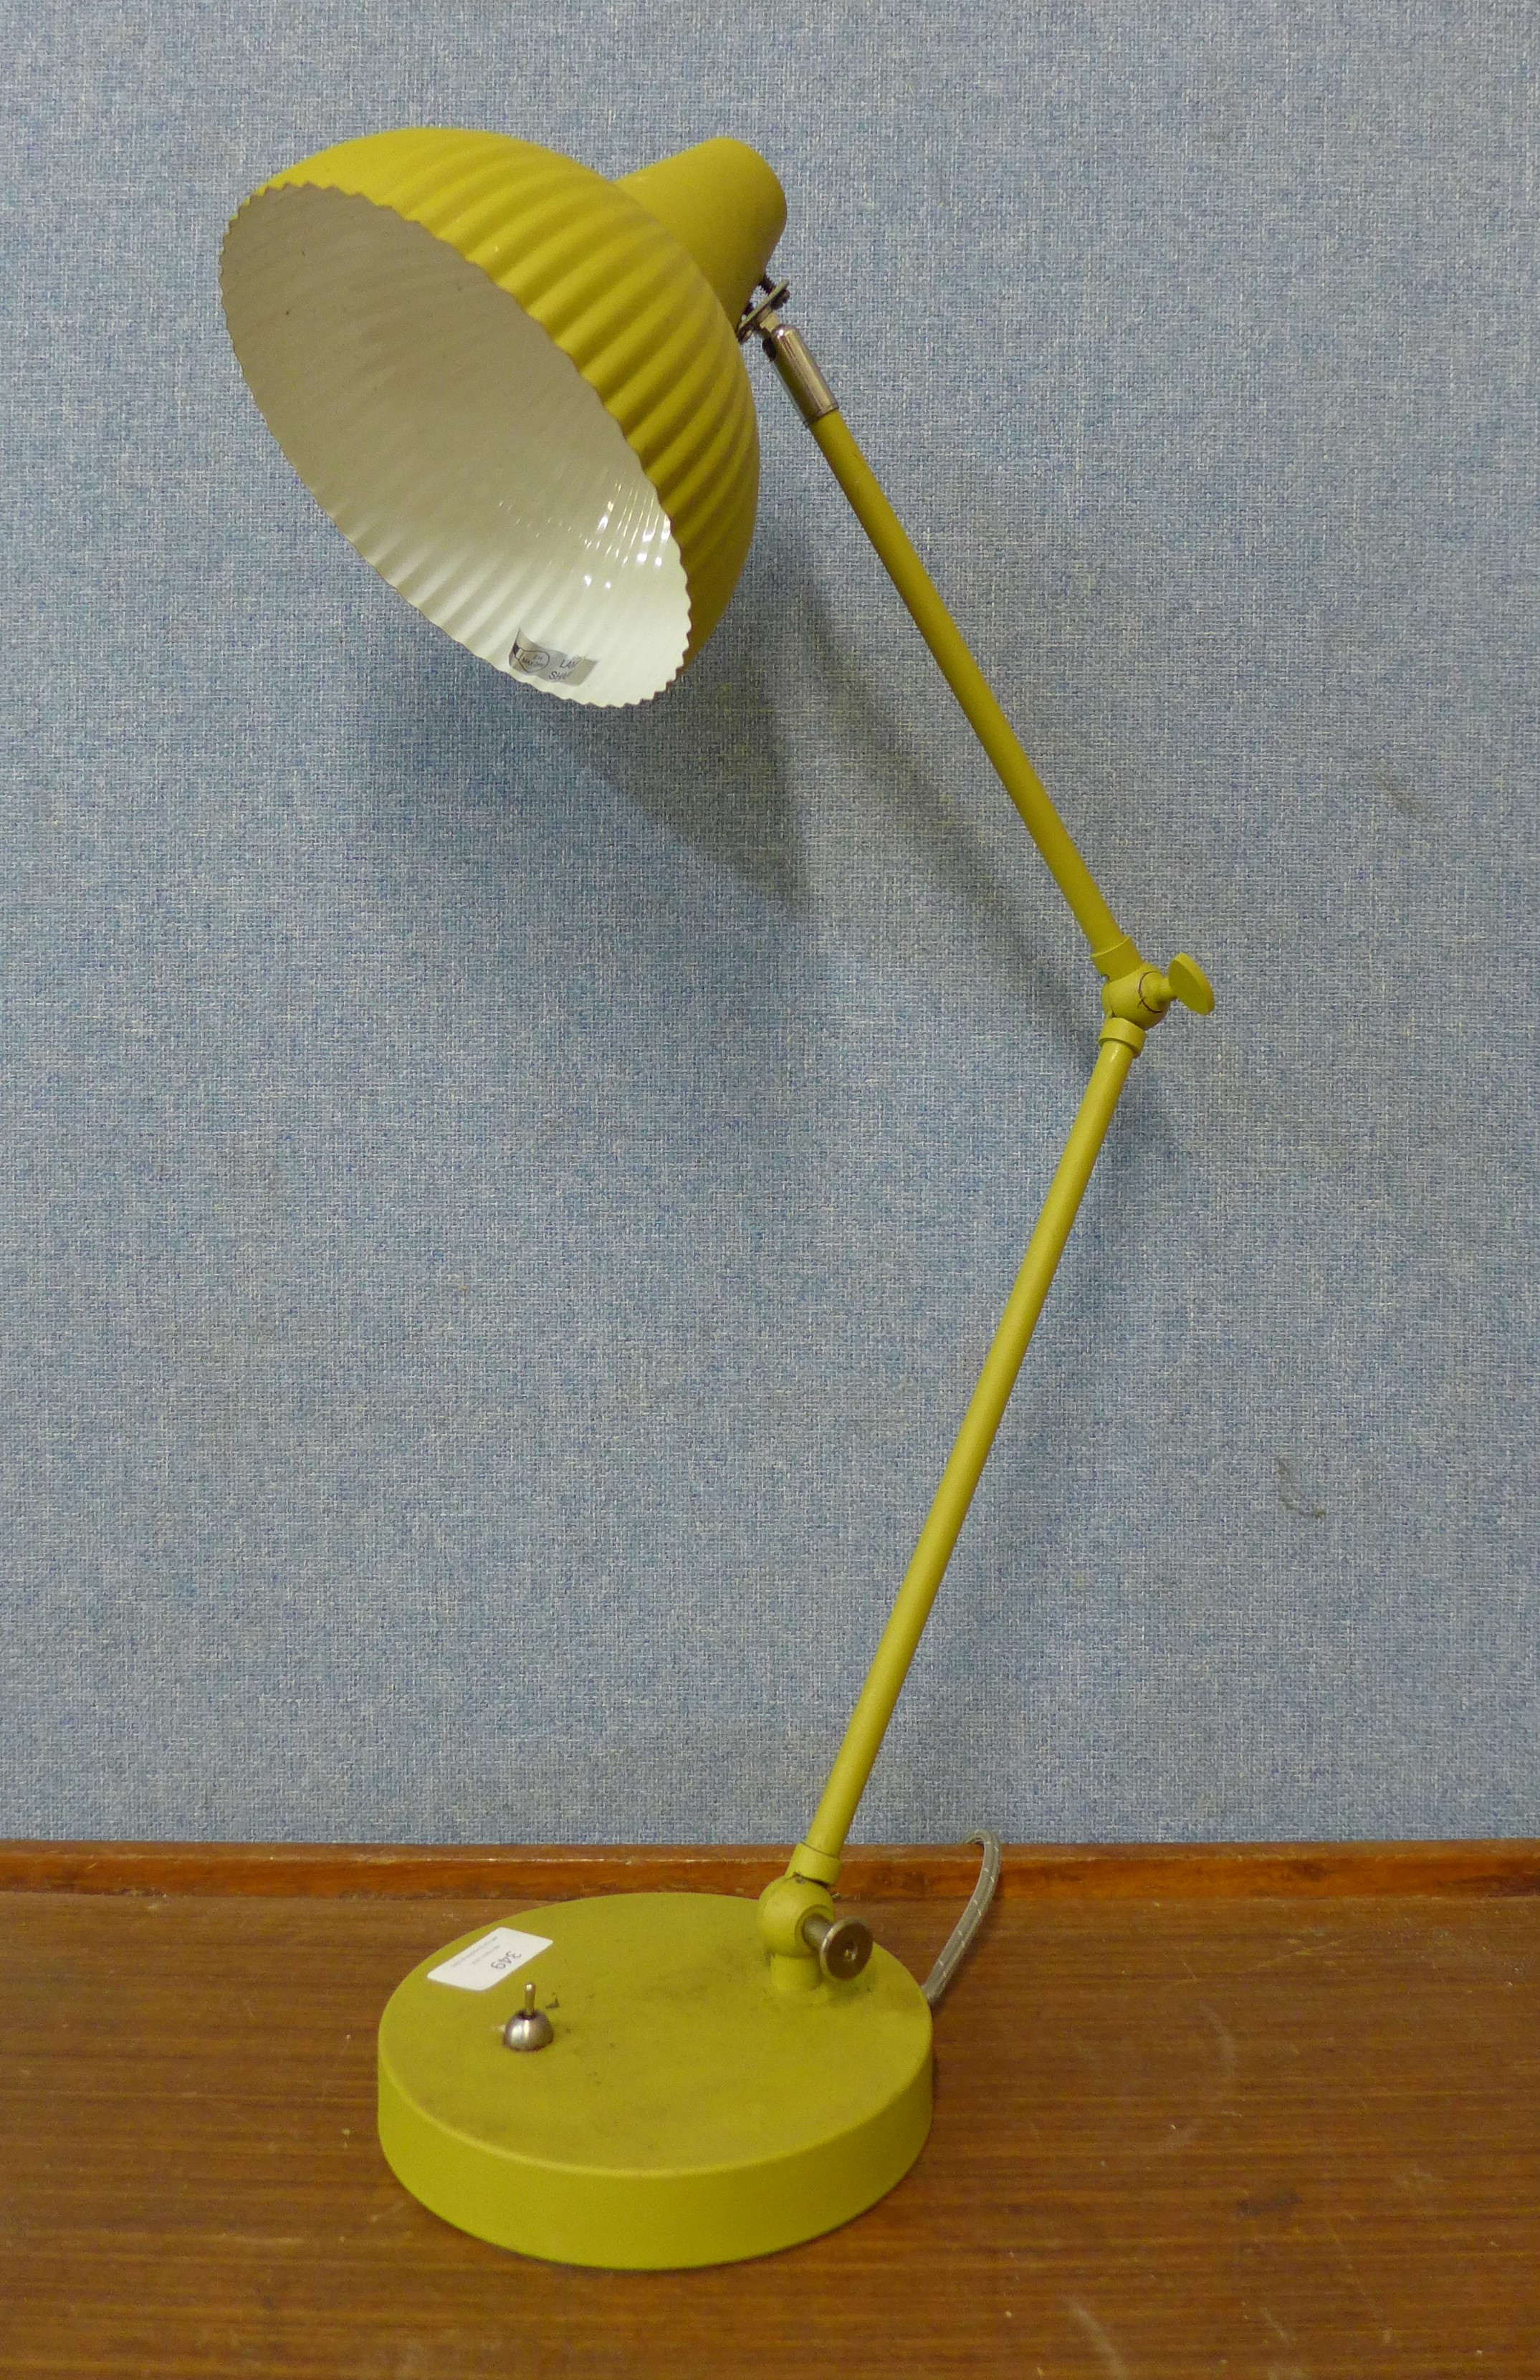 A green metal anglepoise desk lamp